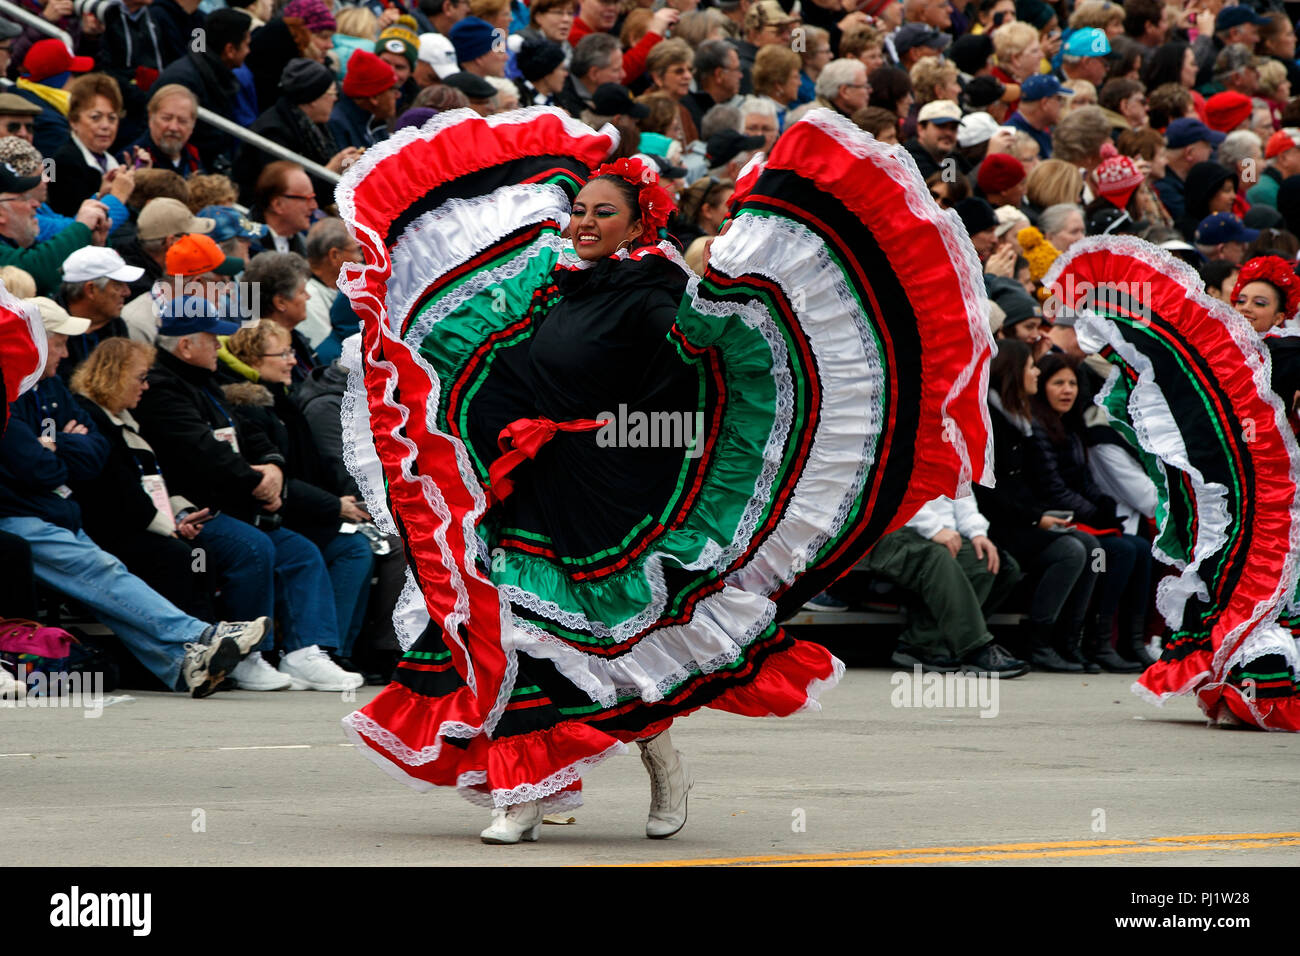 Mexican traditional dancer on the route of the 2017 Tournament of Roses Parade, Rose Parade, Pasadena, California, United States of America Stock Photo